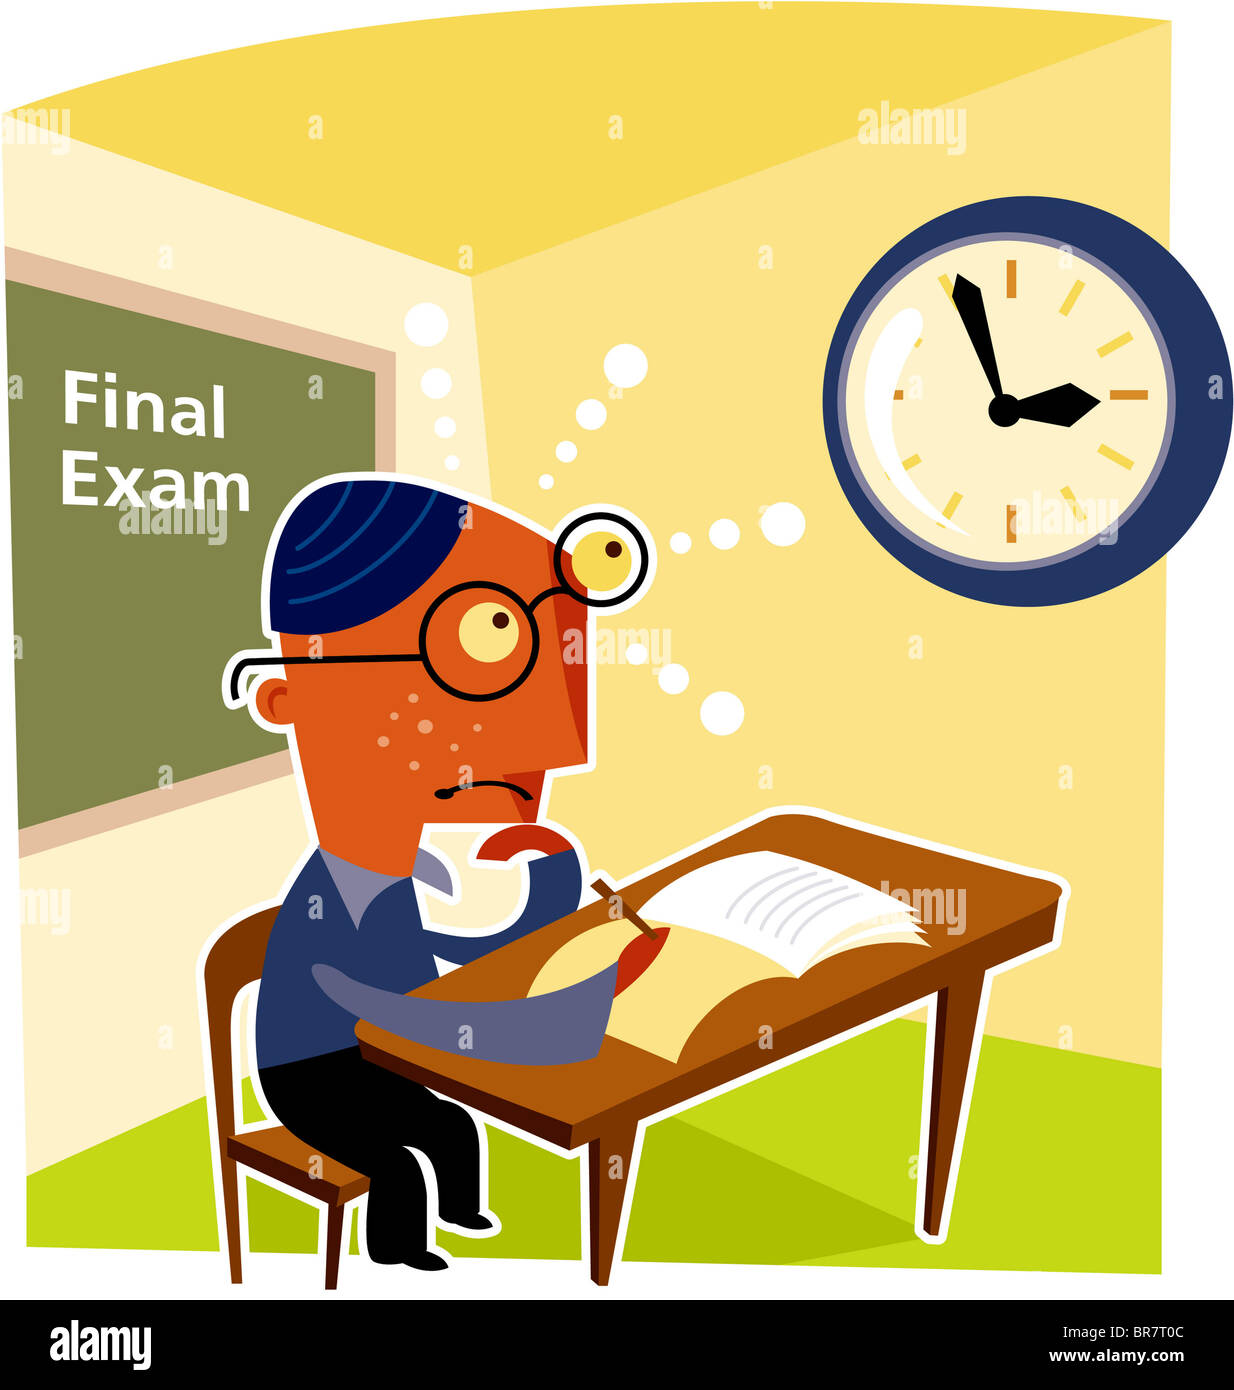 A bespectacled boy taking a final exam Stock Photo